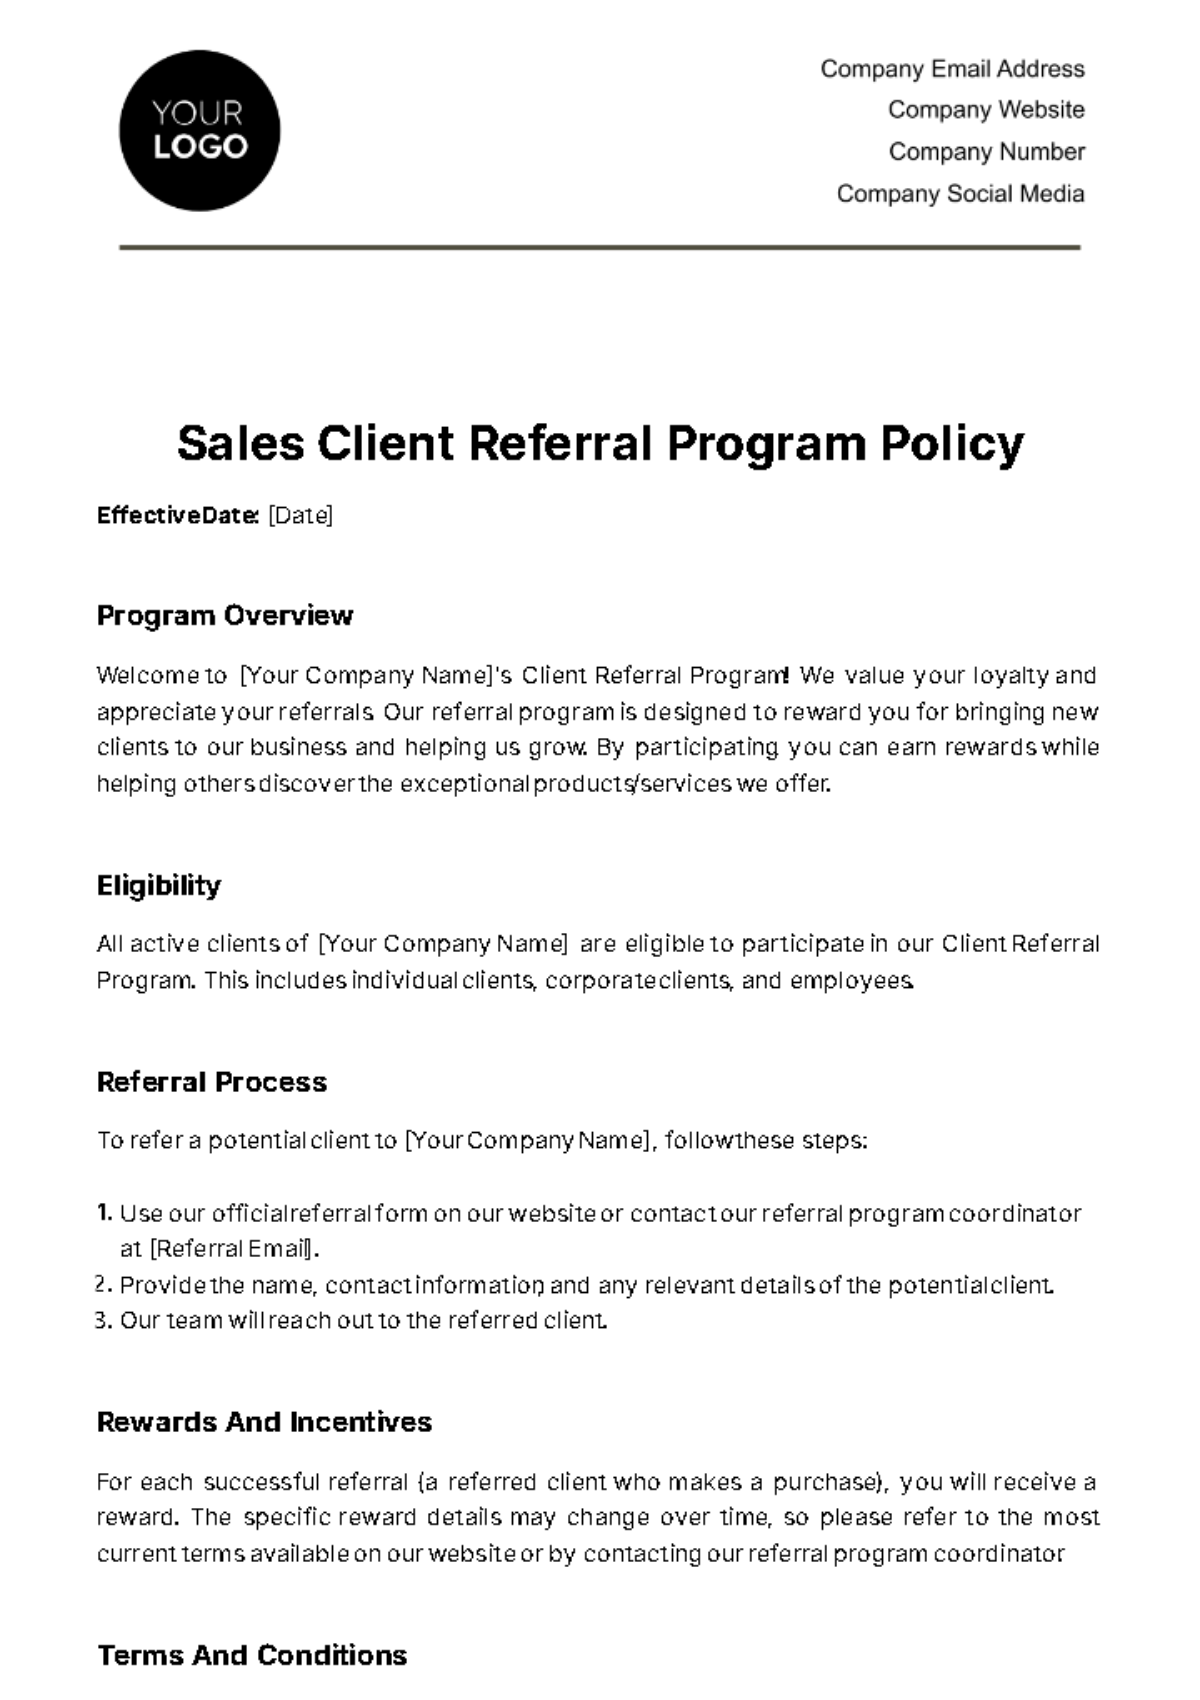 Sales Client Referral Program Policy Template